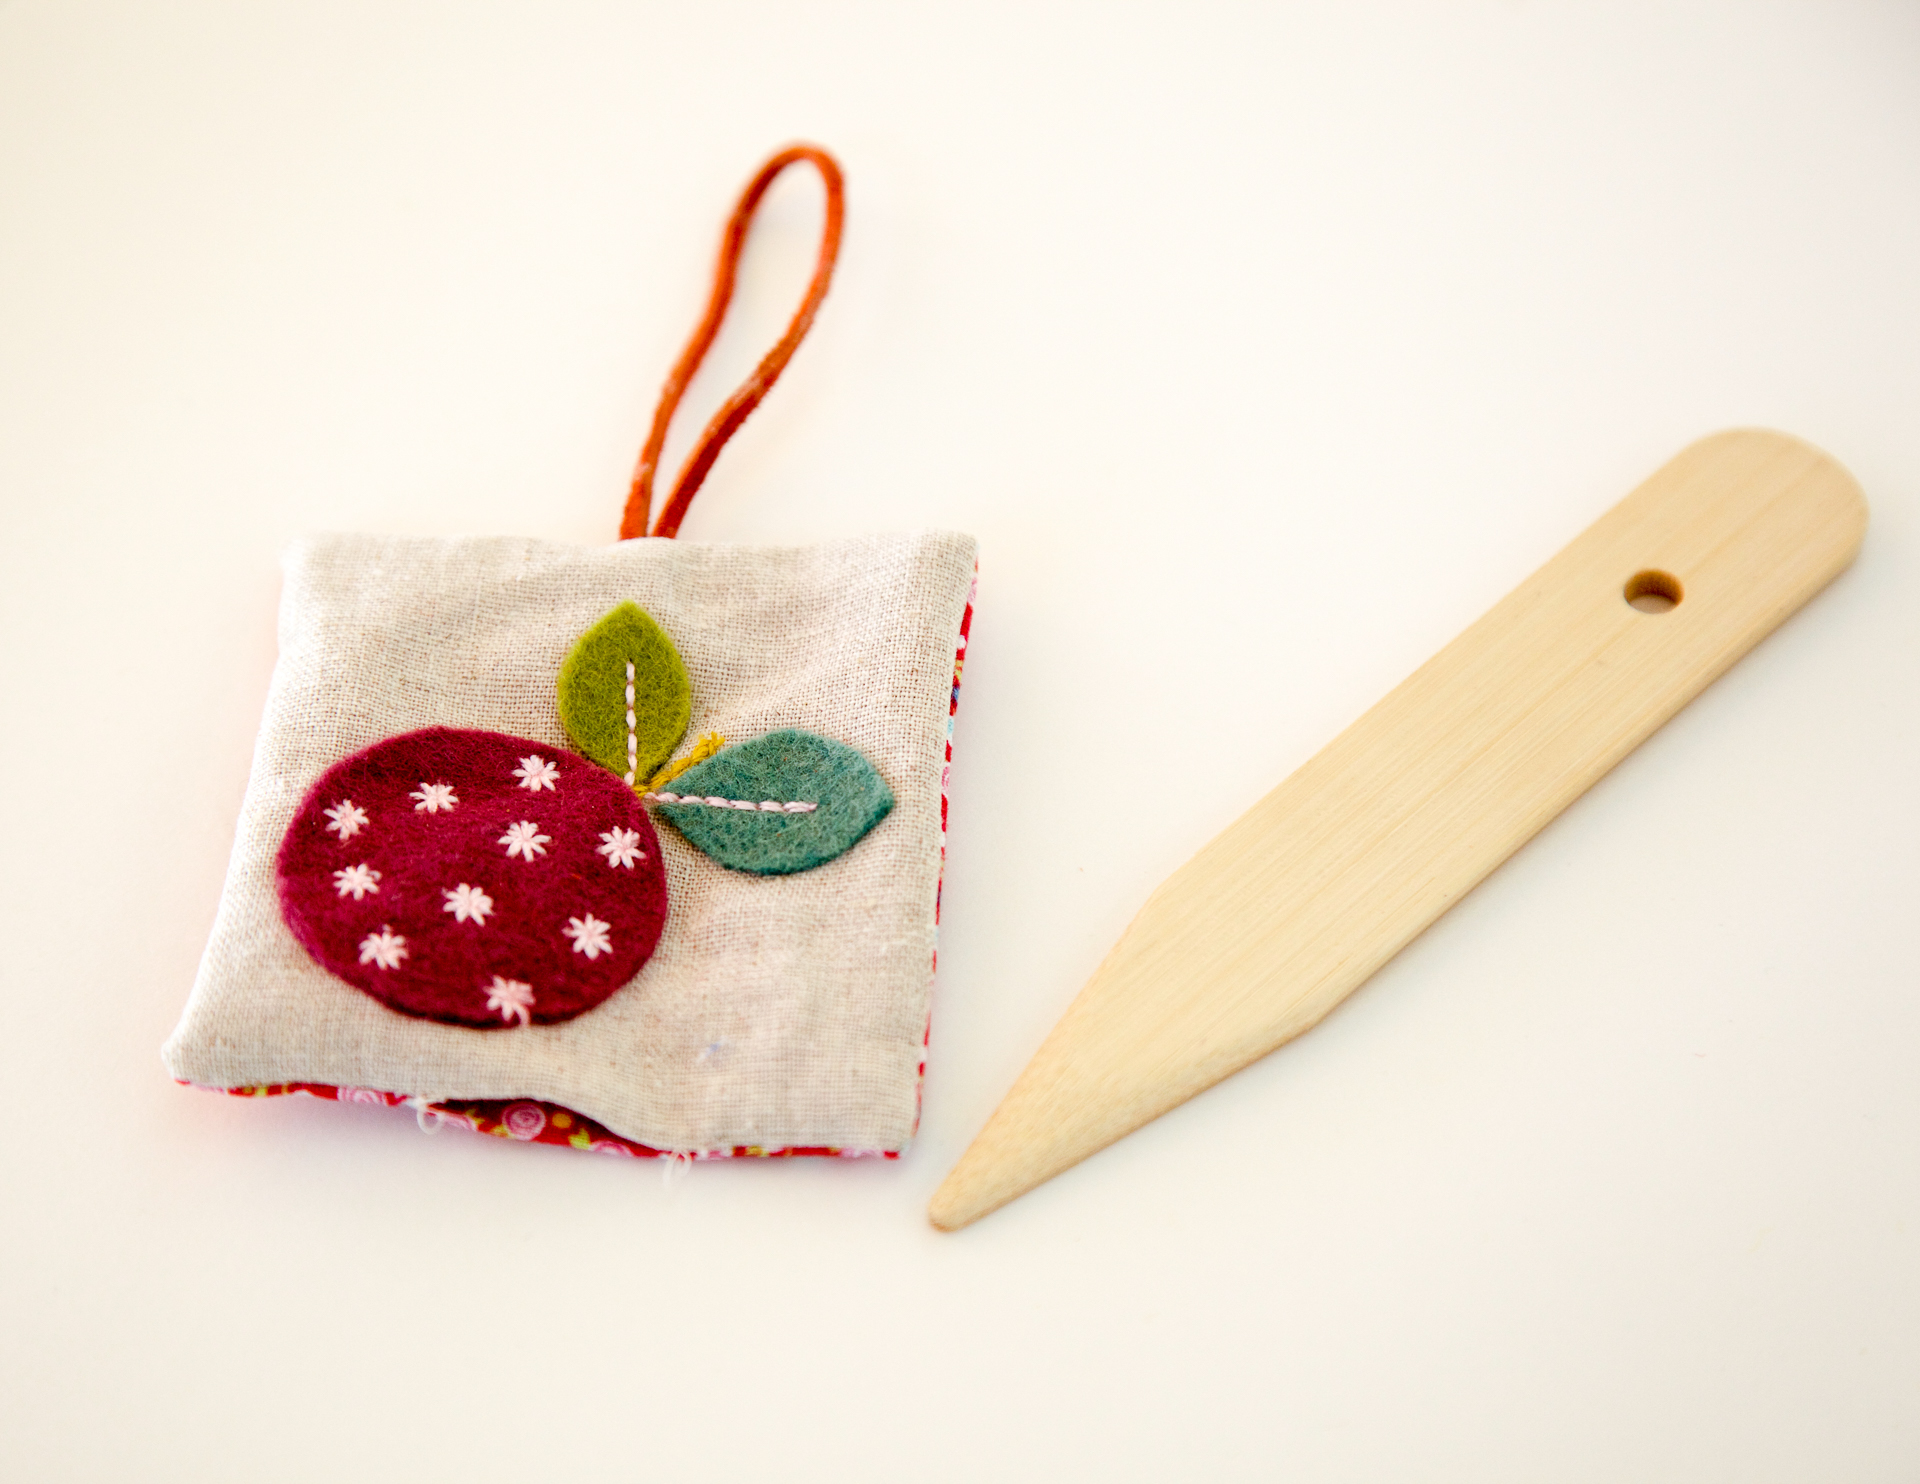 Learn How to Make a Pincushion with Wool Applique - The Polka Dot